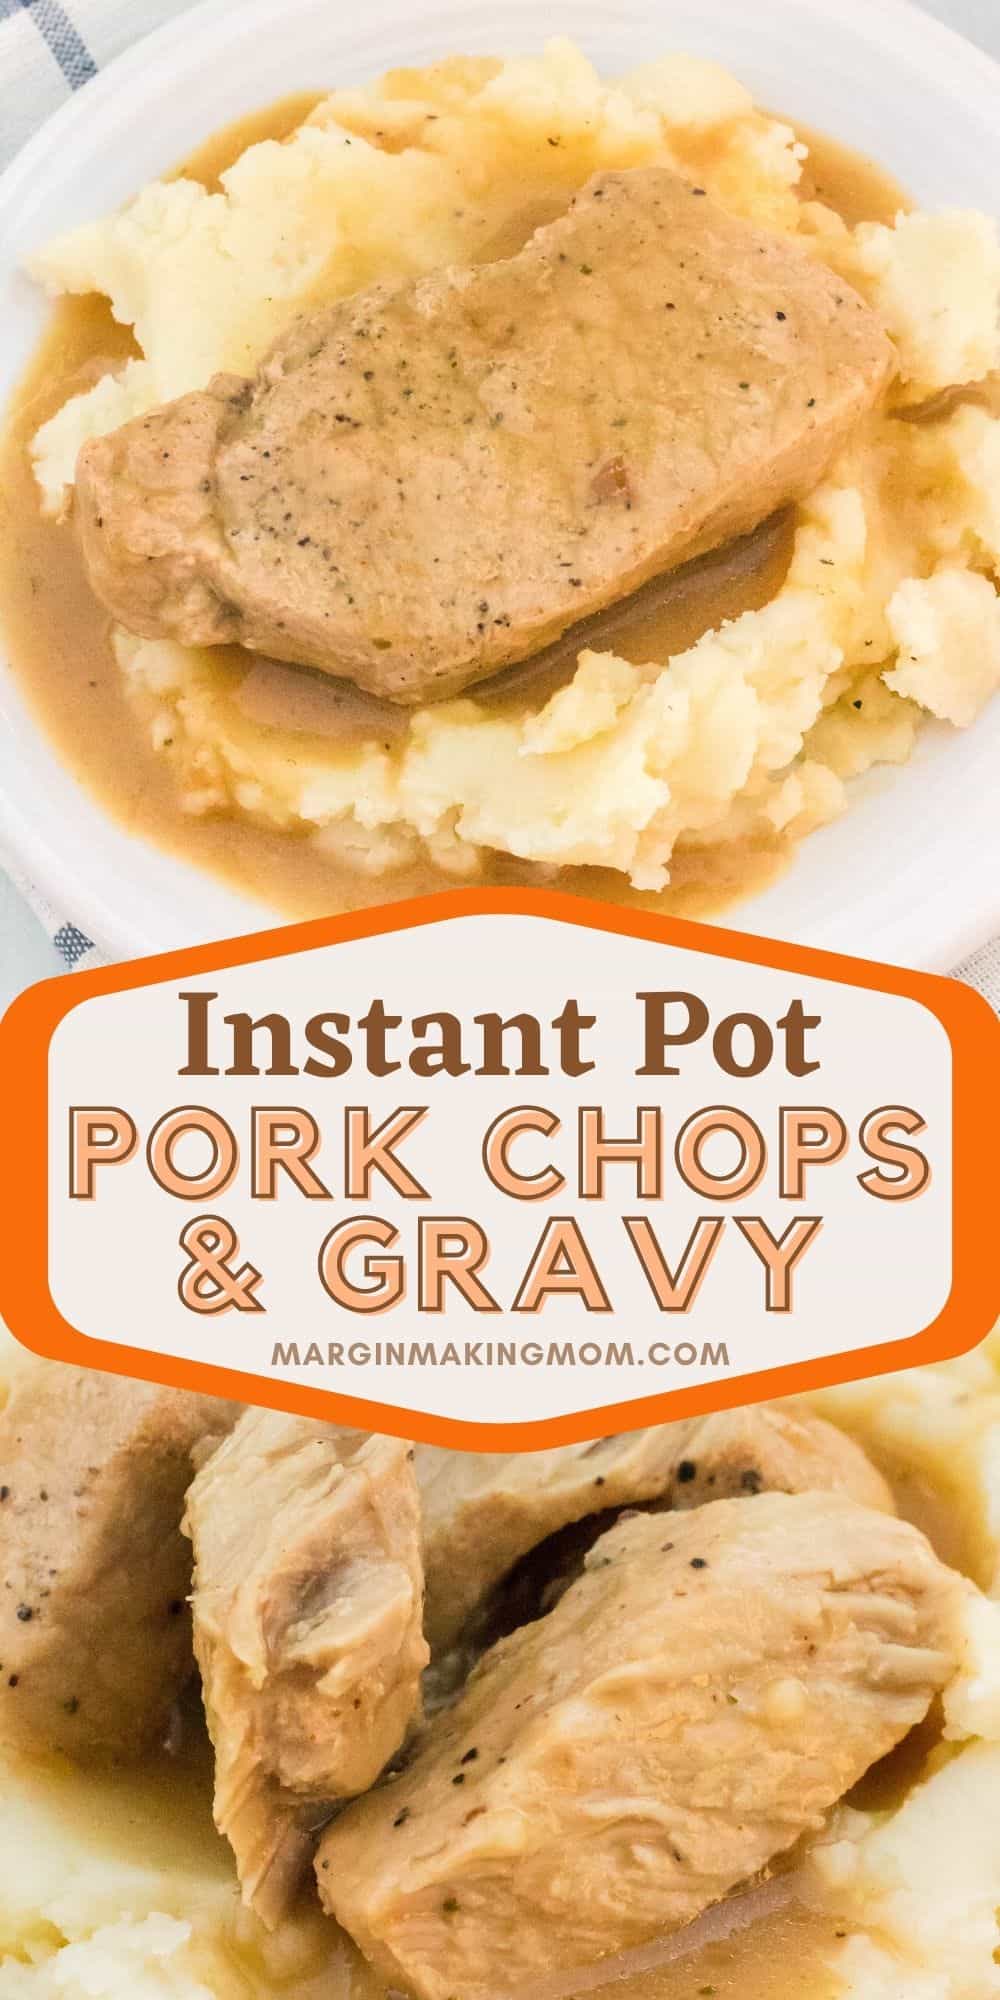 collage image featuring two photos of Instant Pot pork chops and gravy. One shows a whole pork chop with gravy over mashed potatoes. The other shows a pork chop that's been pulled into smaller pieces, showing the tender interior.